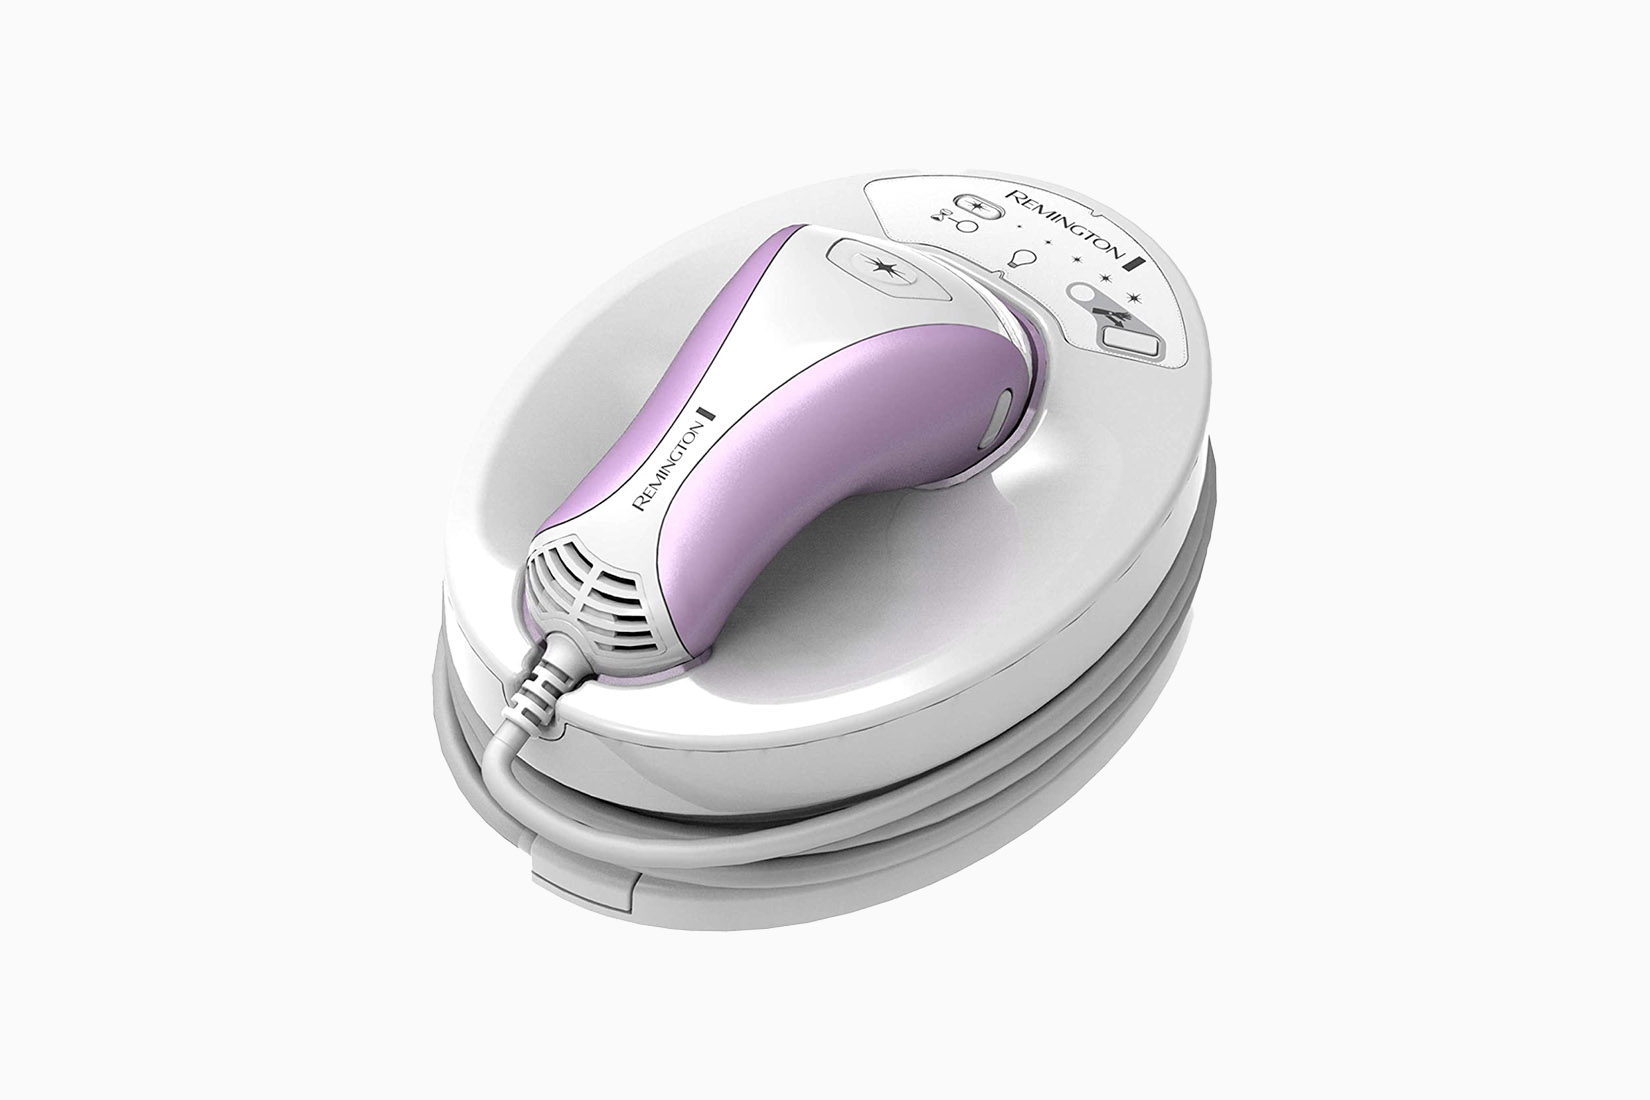 best ipl hair removal remington review Luxe Digital